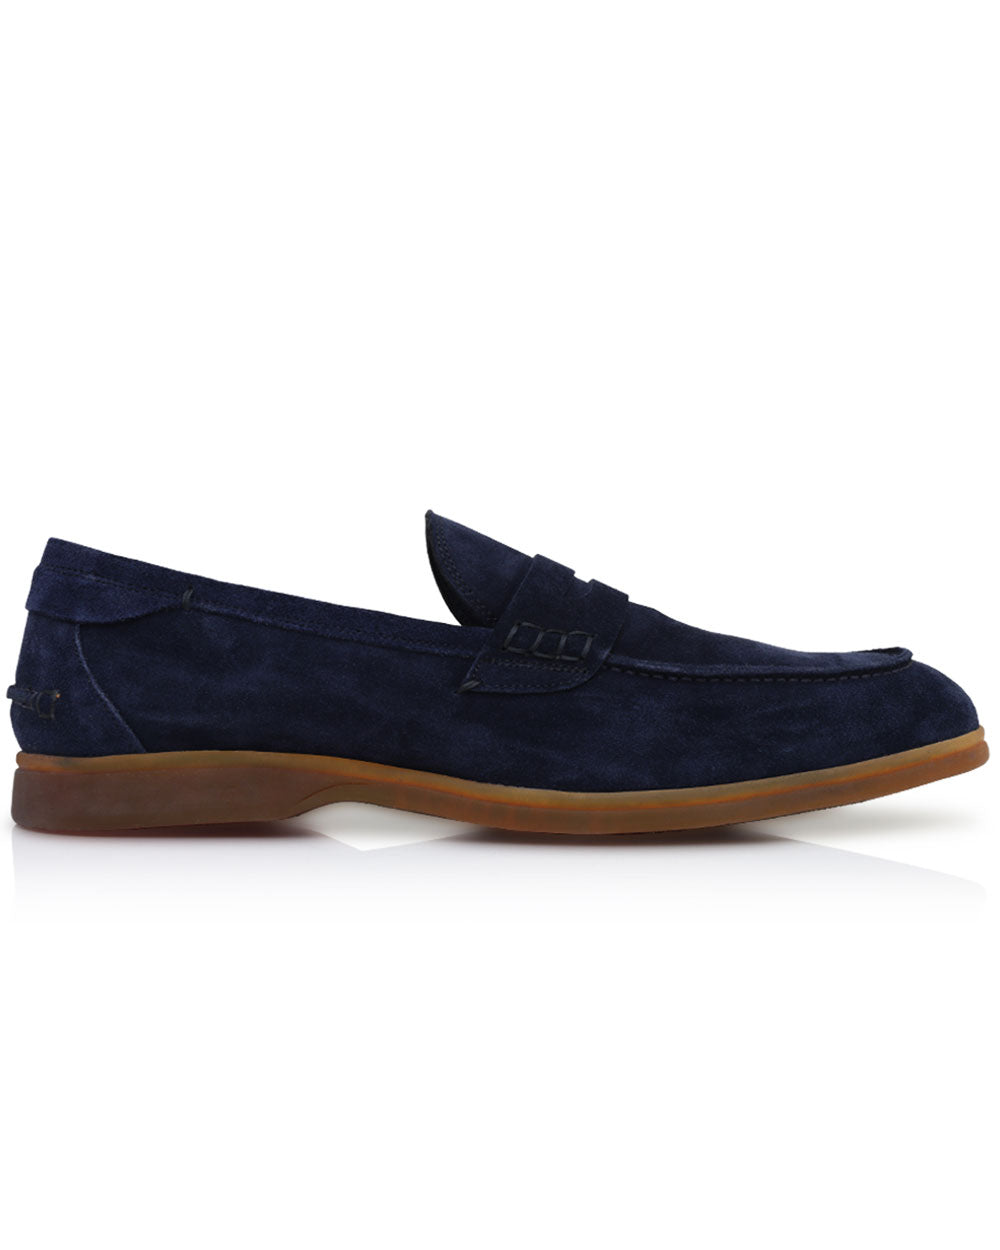 Suede Penny Loafer in Navy